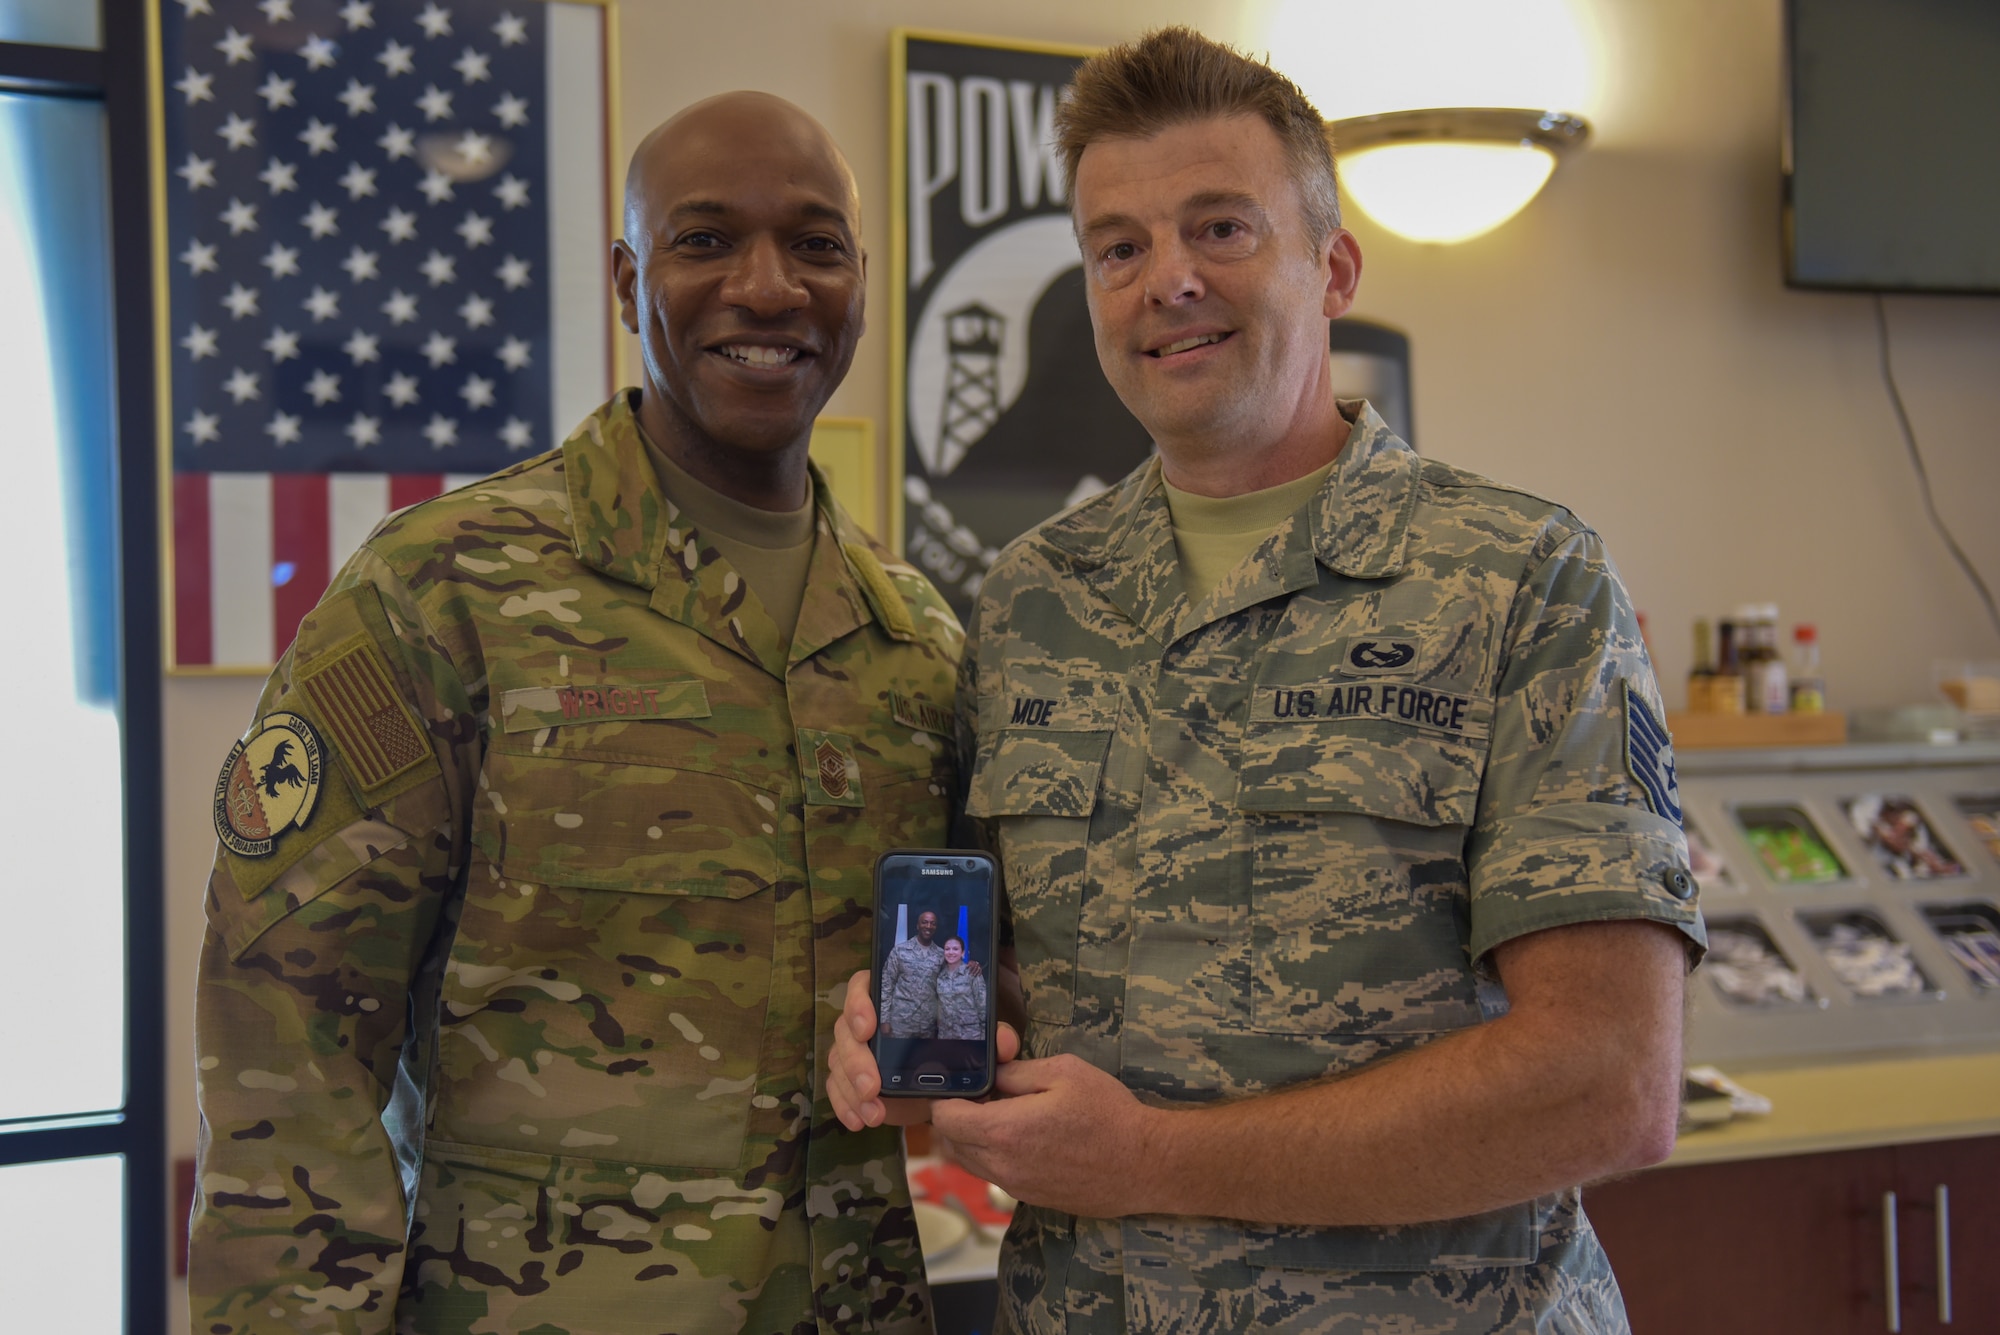 An Airman poses for a photo with Chief Wright